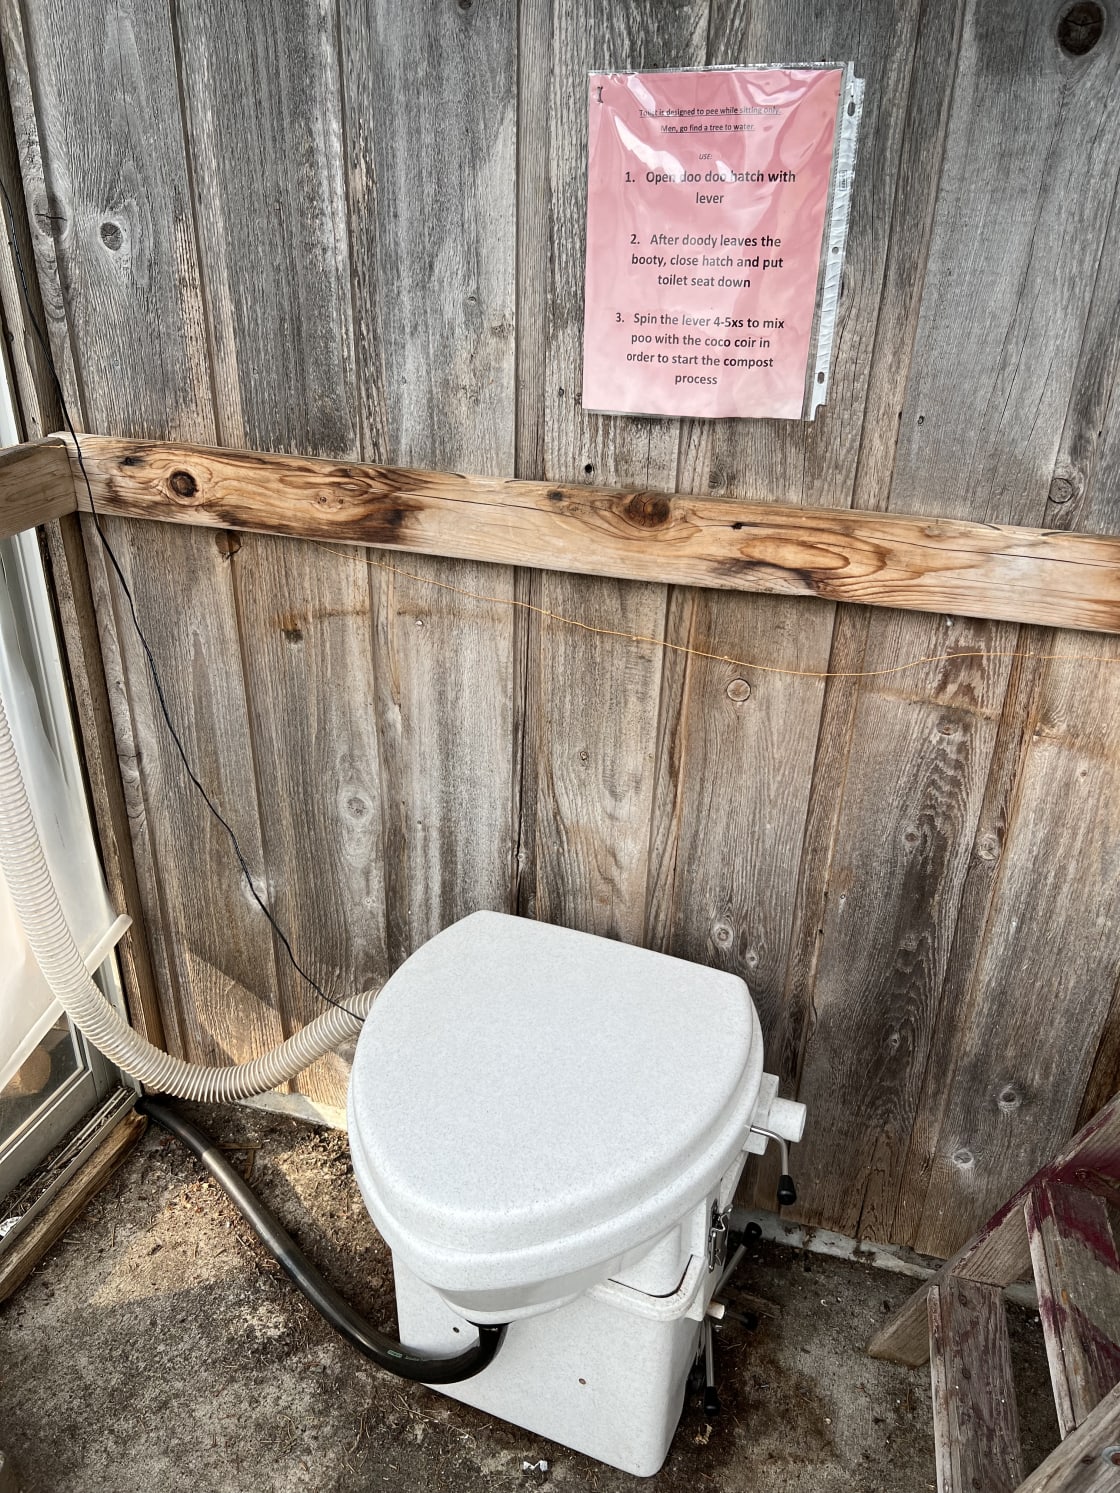 Compost toilet (better option vs. outhouse)